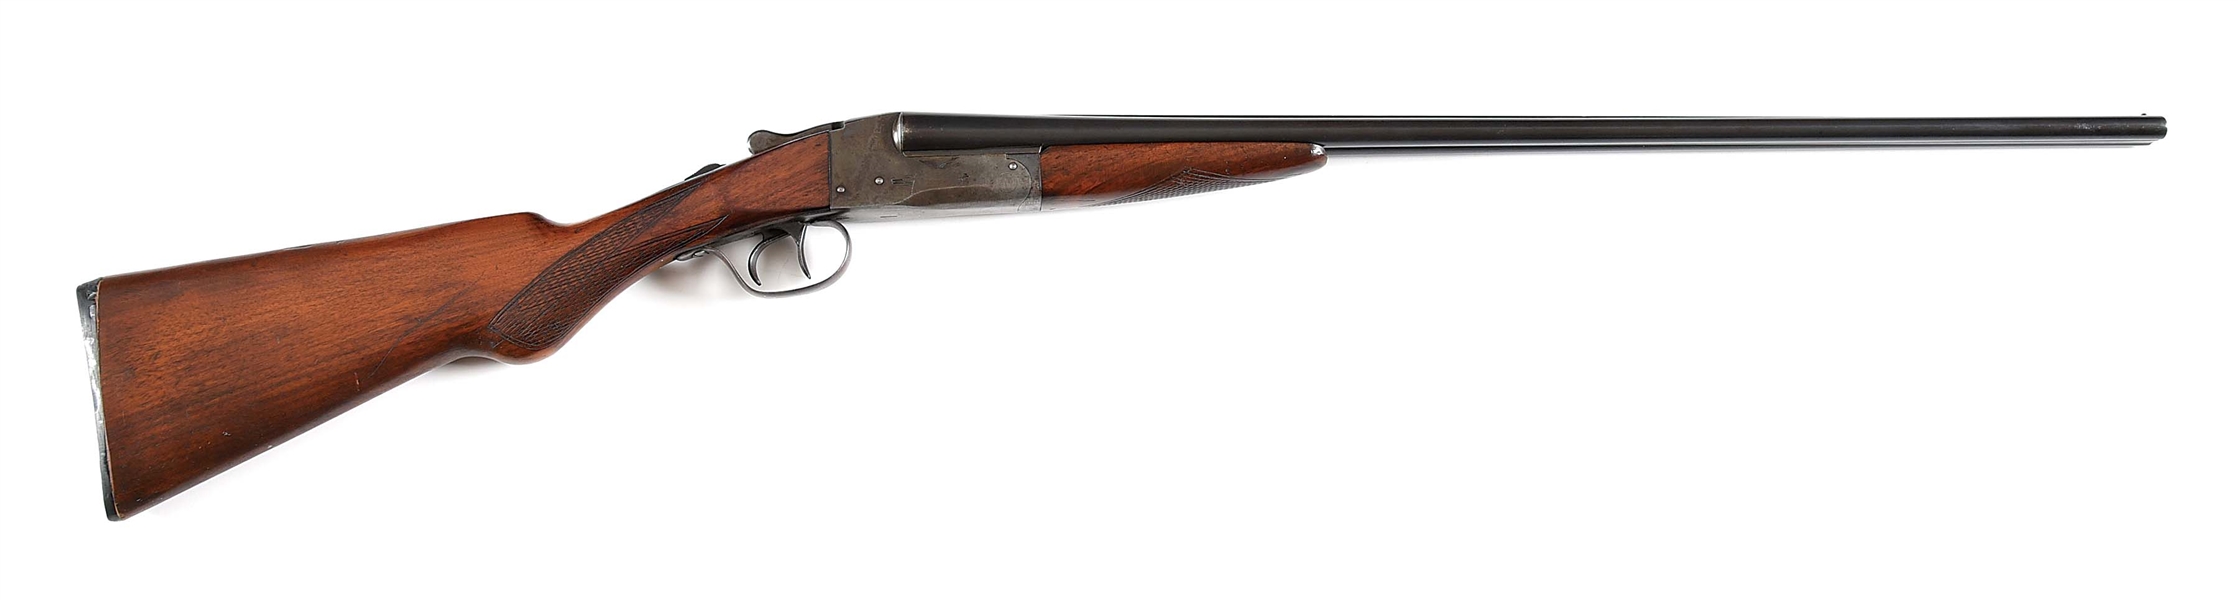 (C) ITHACA LEFEVER ARMS 410 FIELD GRADE SIDE BY SIDE SHOTGUN